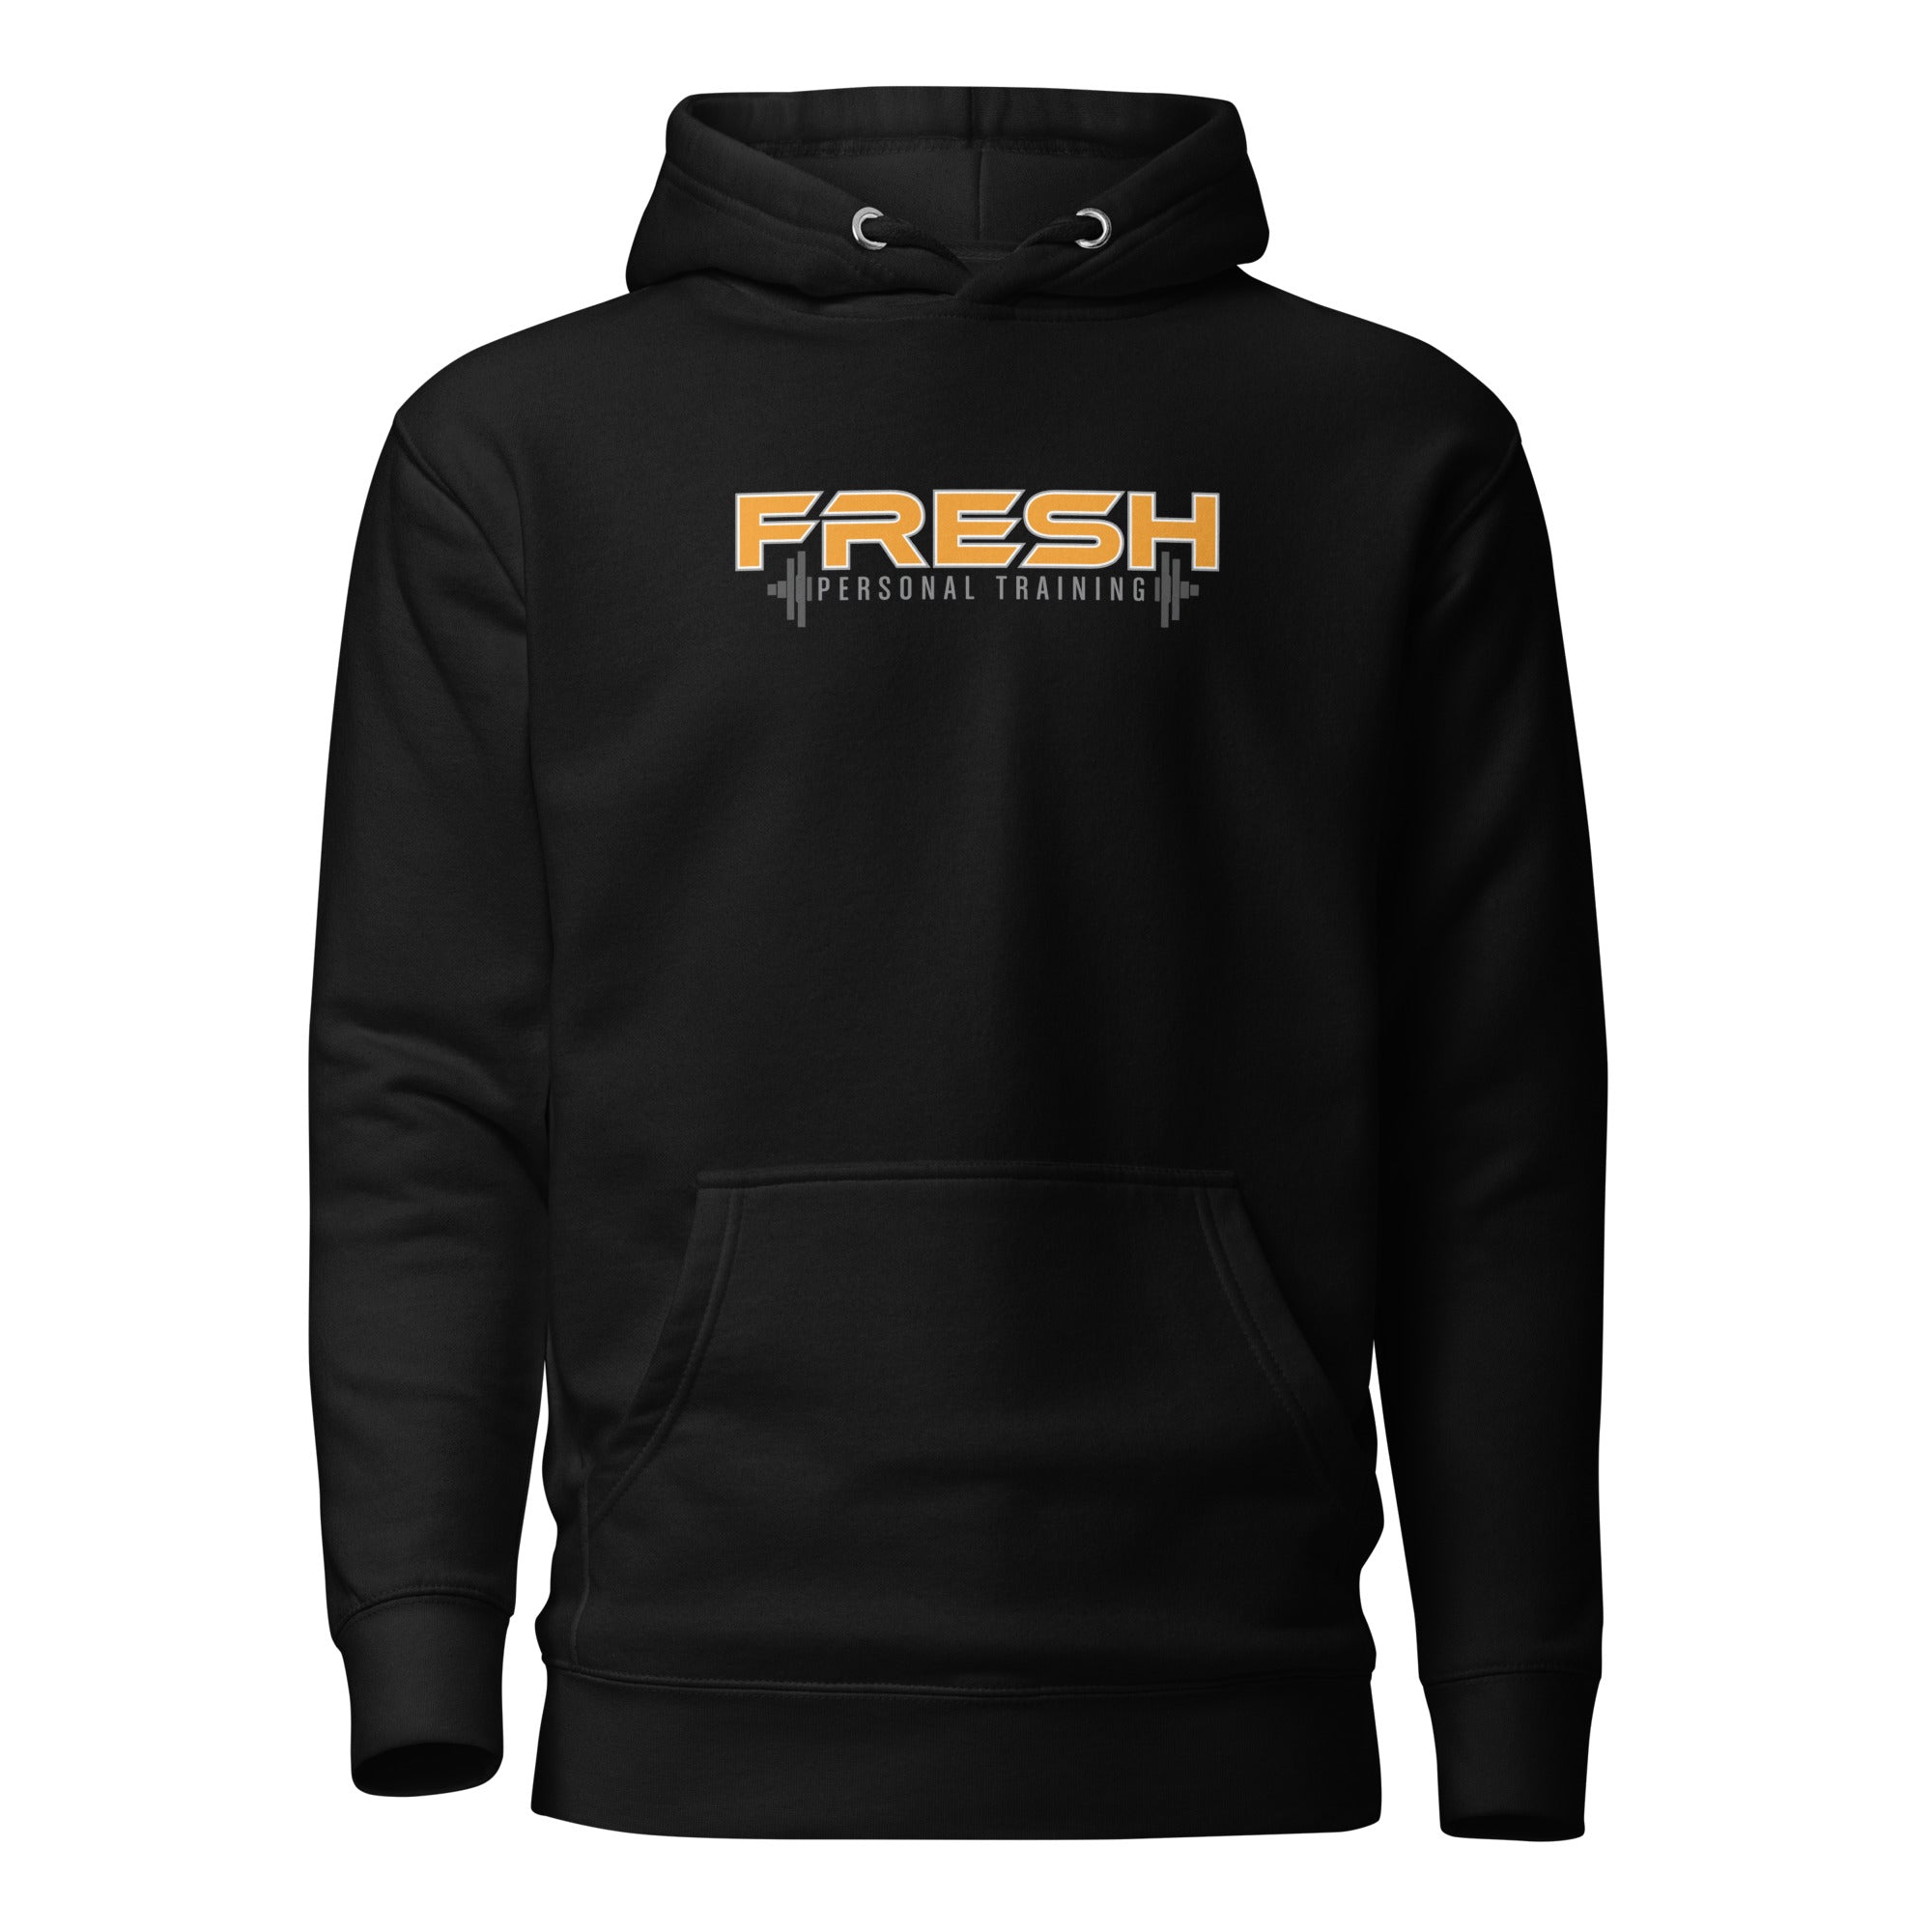 Fresh Level Up: Hall of Fame | Unisex Hoodie